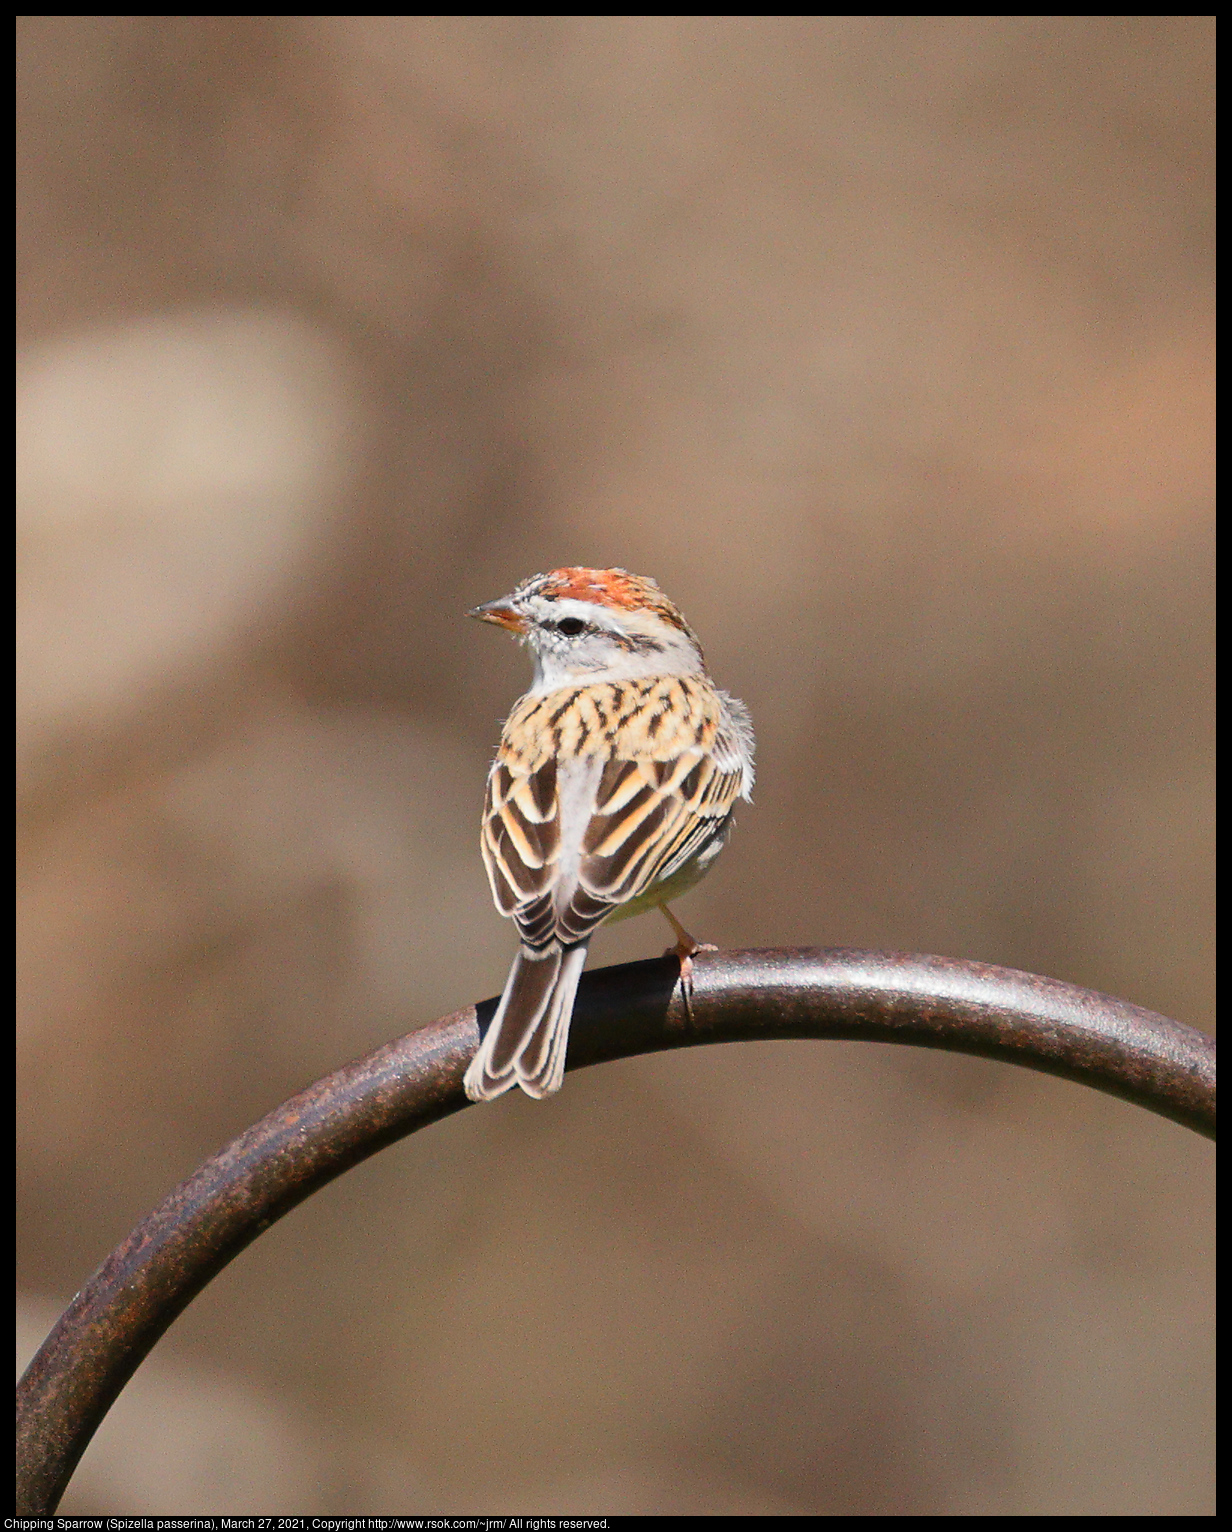 Chipping Sparrow (Spizella passerina), March 27, 2021